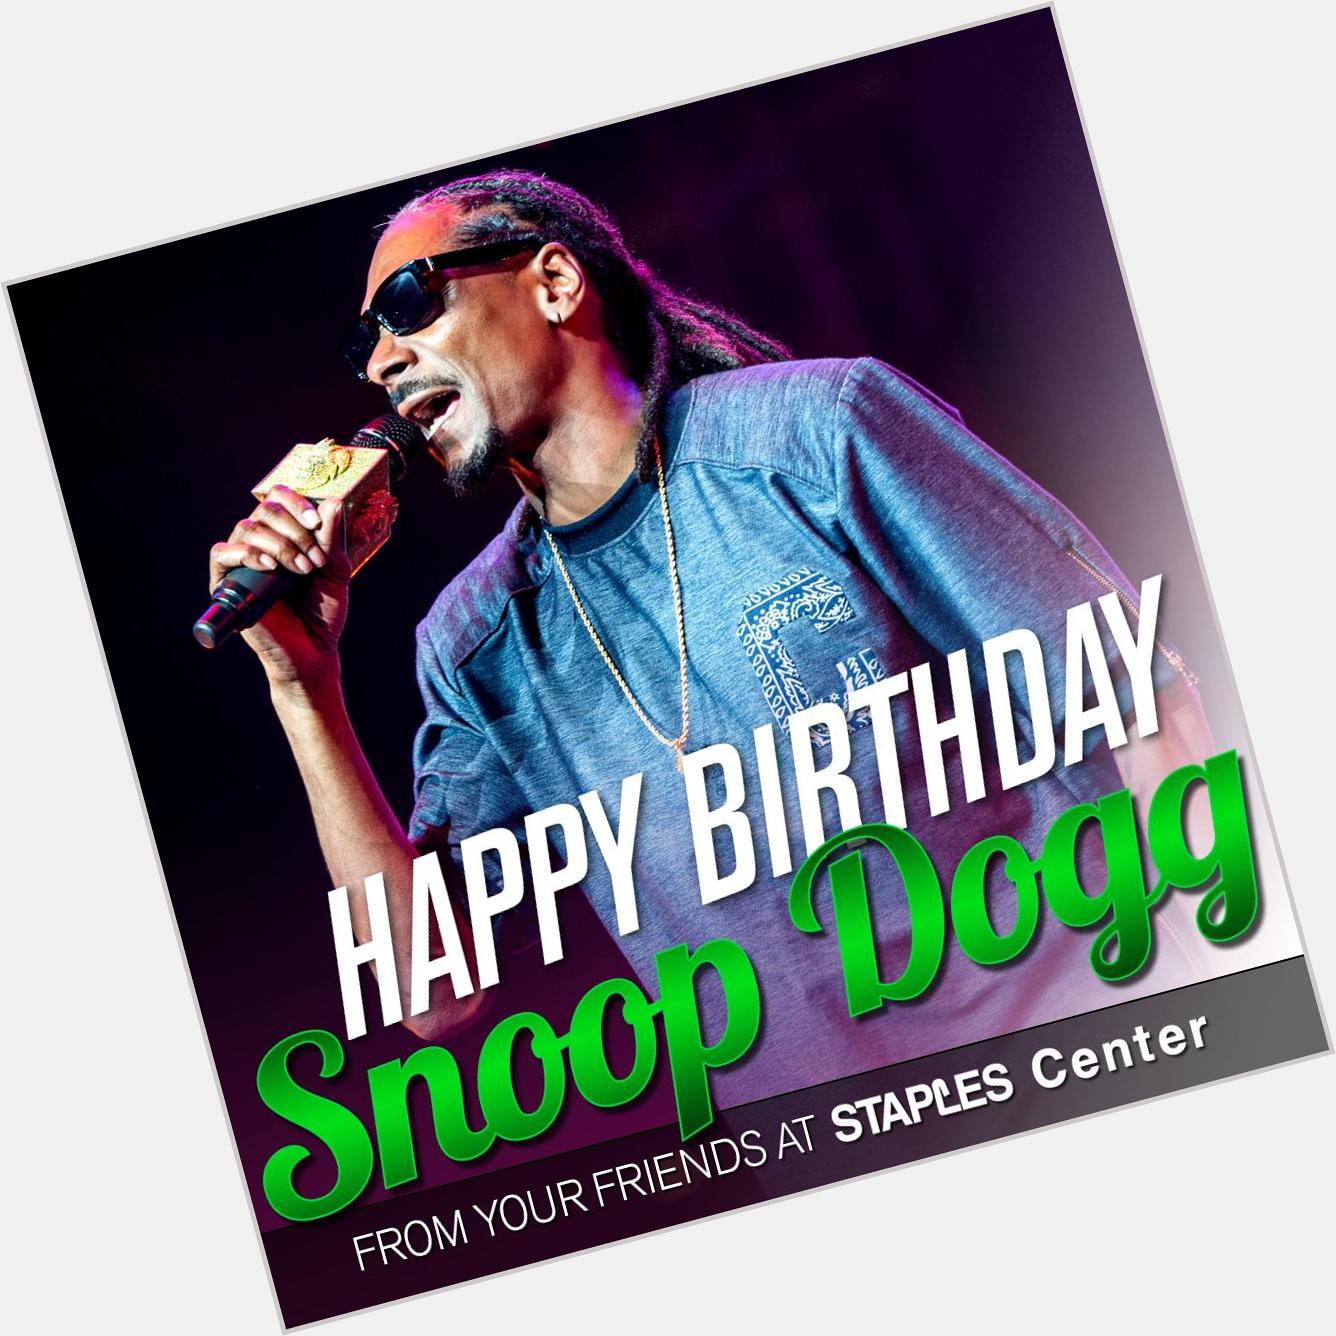 Happy Birthday to the one and only Snoop Dogg!  